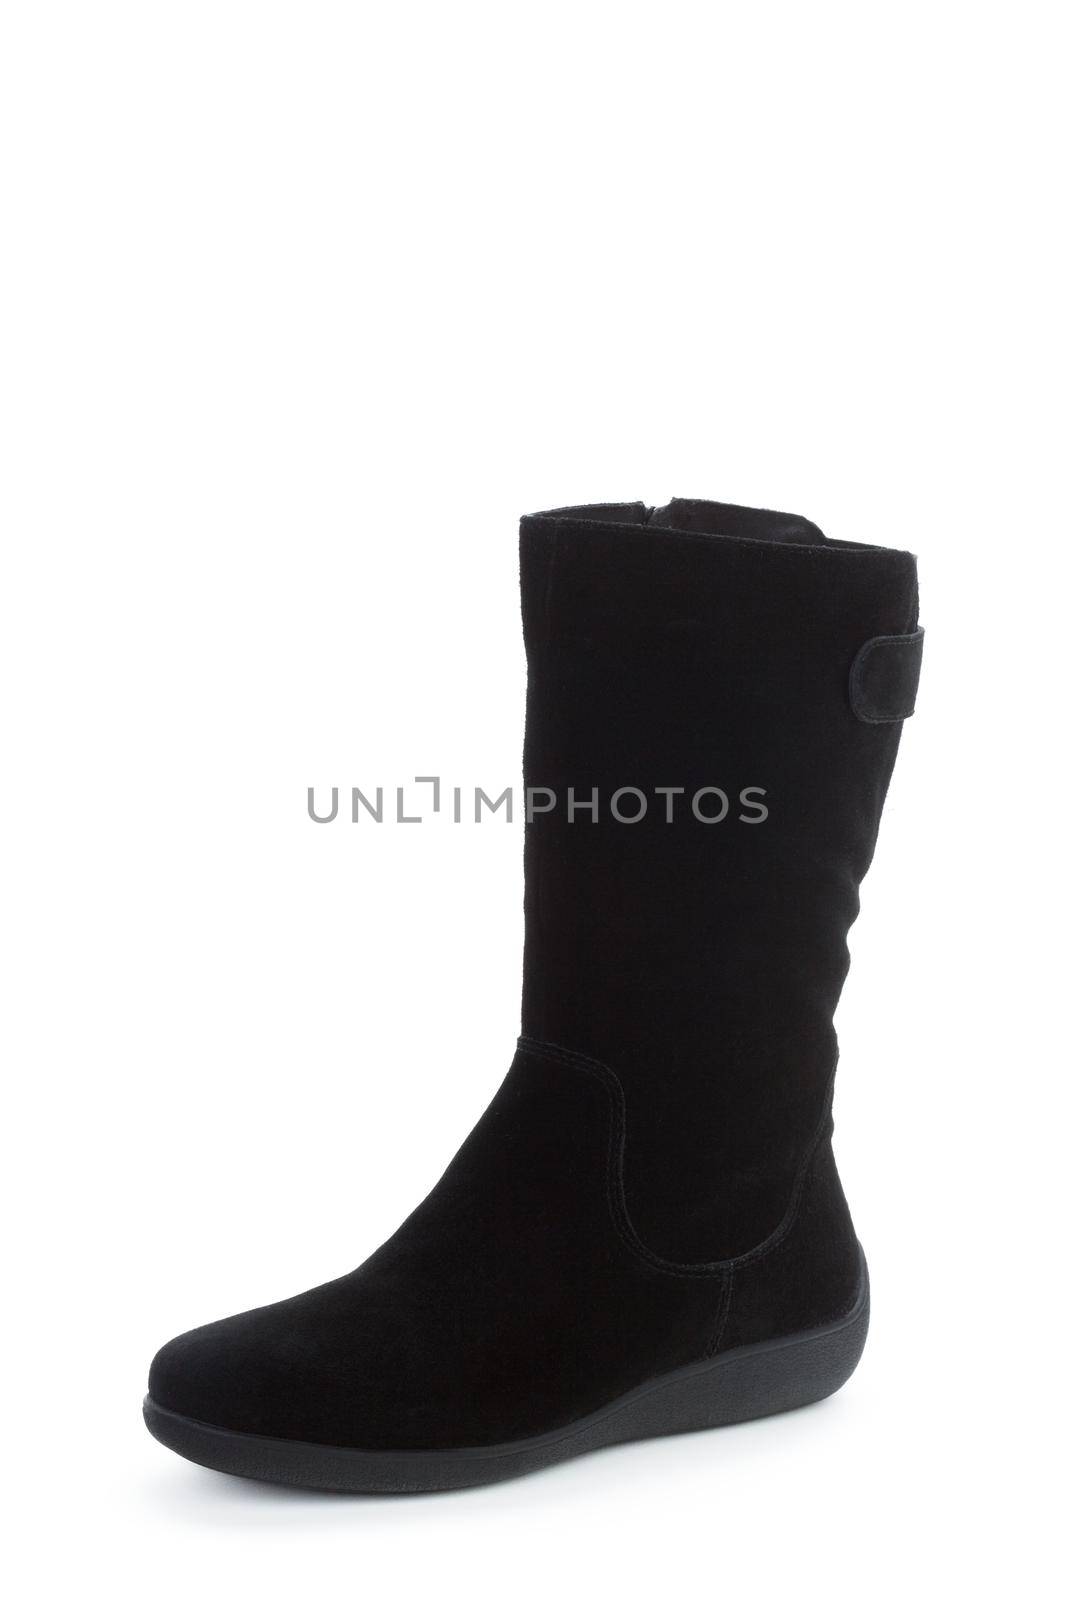 Winter female leather boots isolated on white background